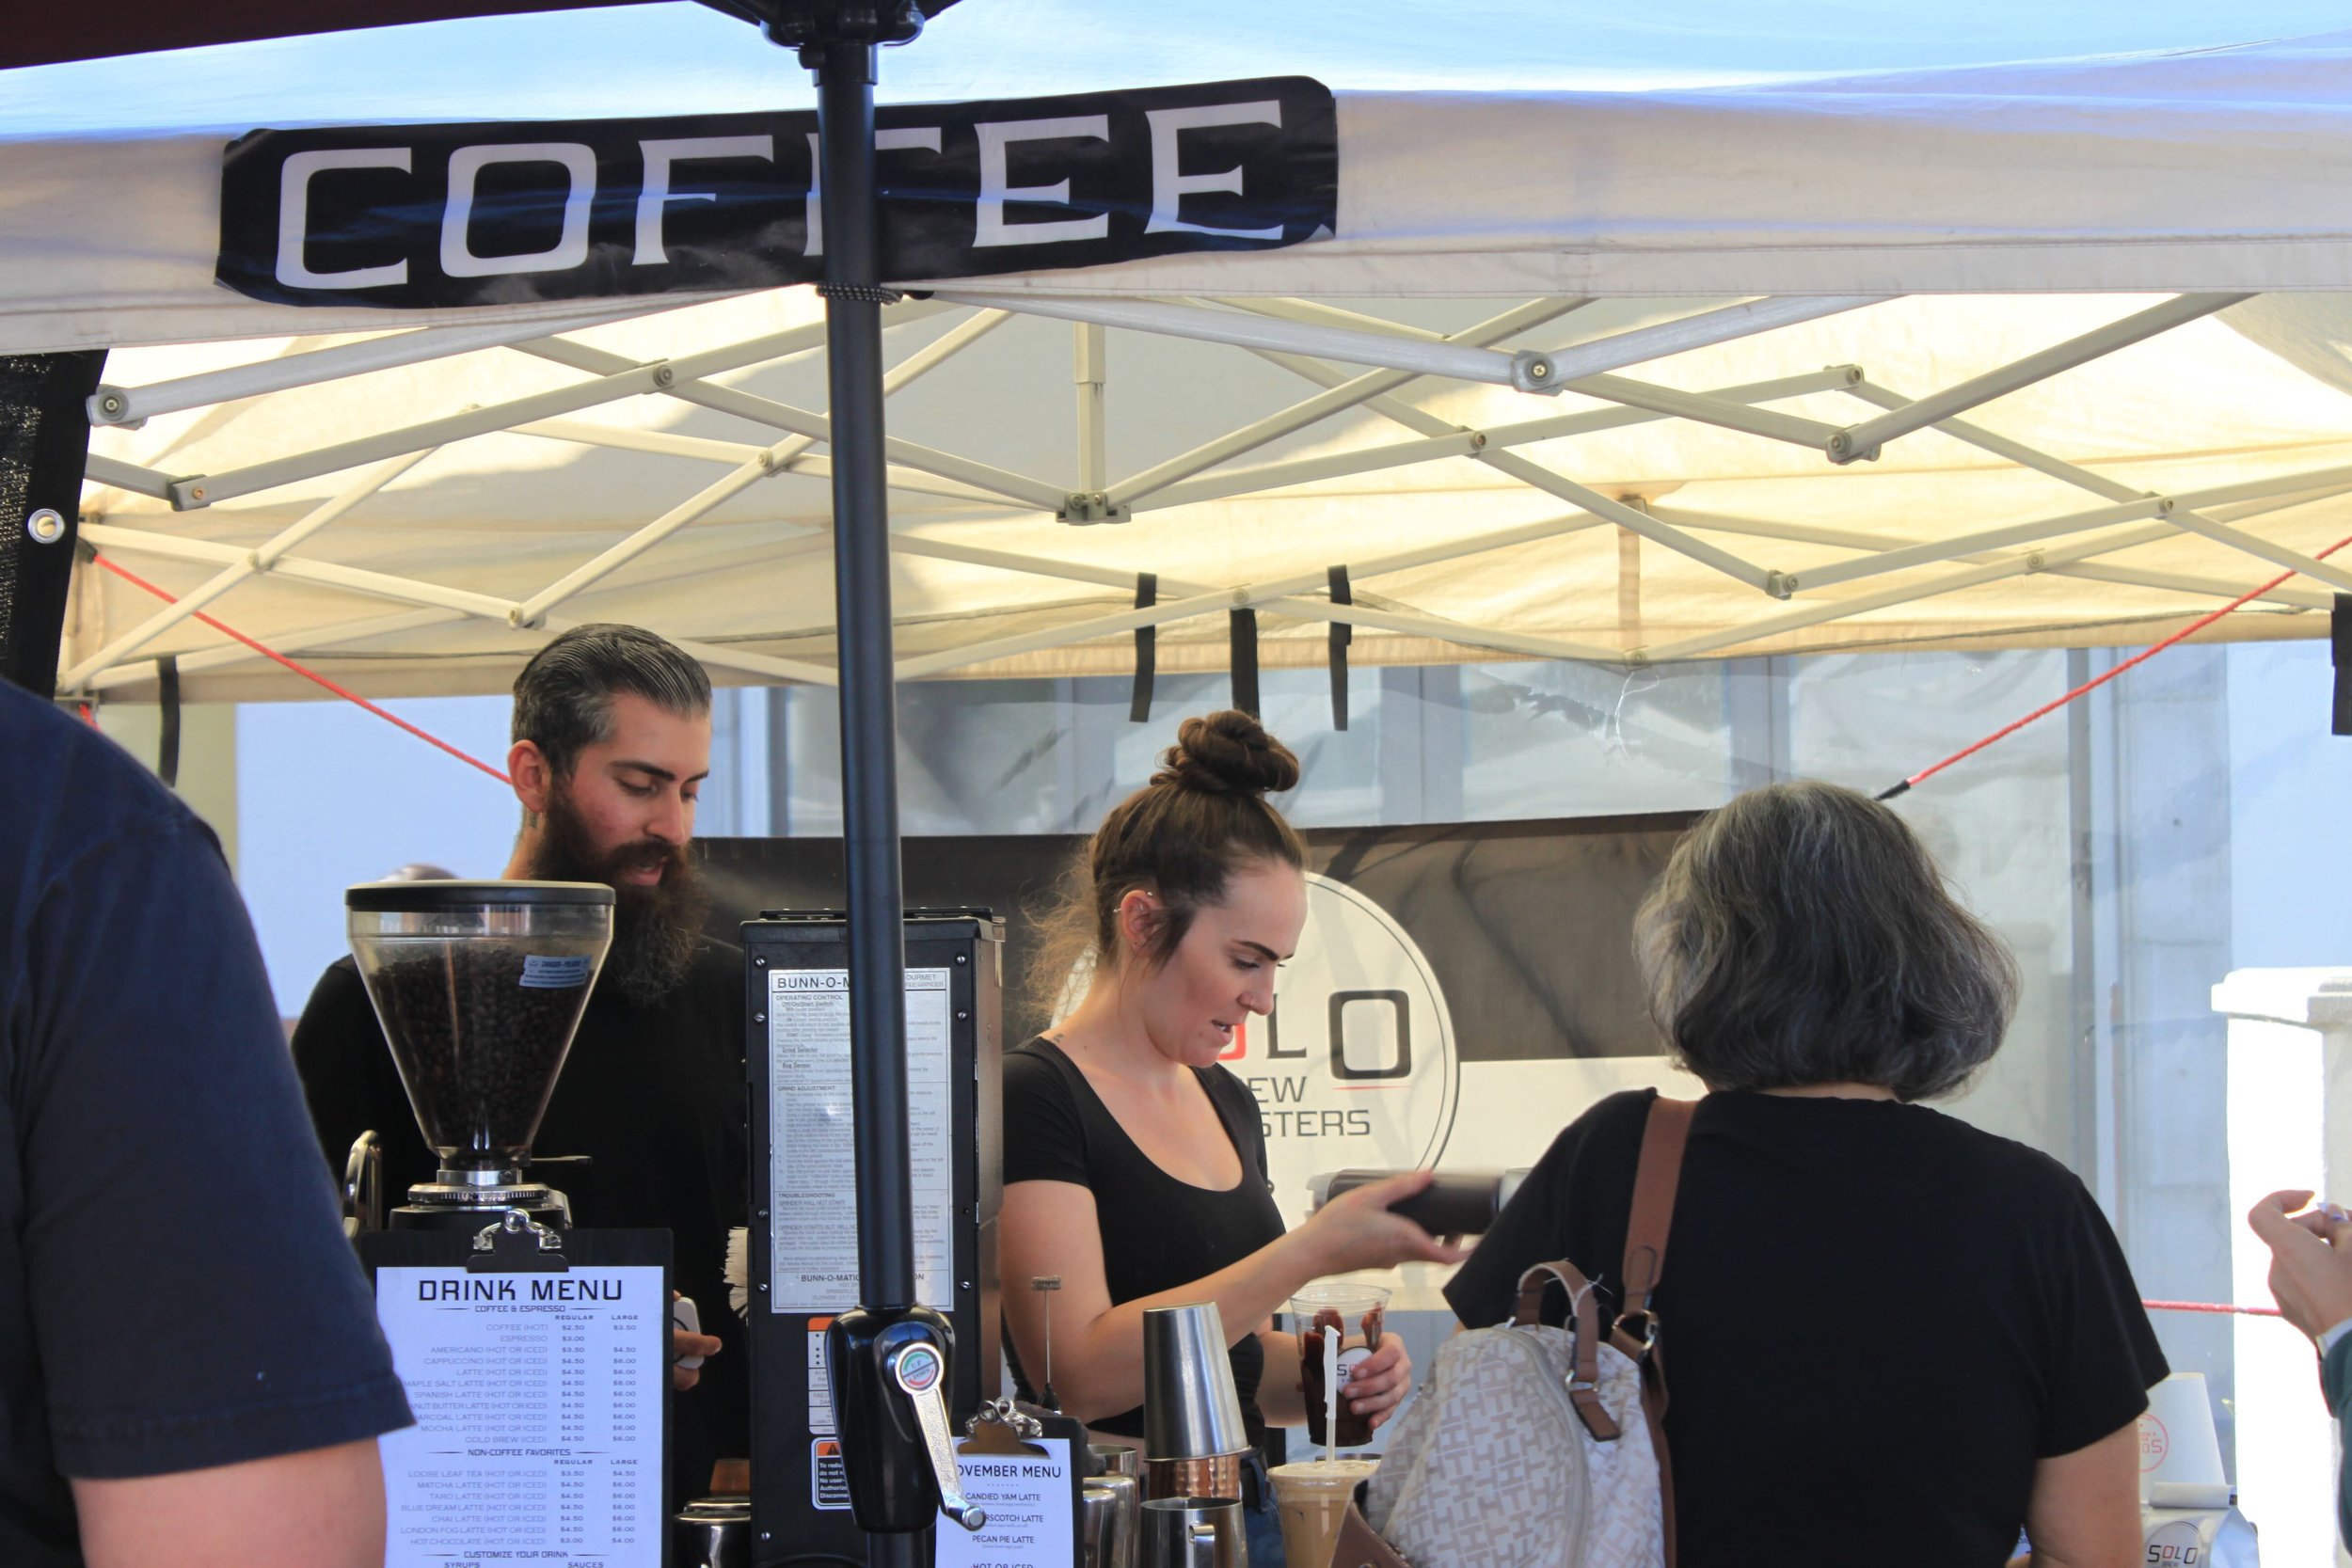  At the market debut, the coffee stand takes center stage, captivating all with the aroma of freshly brewed goodness, inviting everyone to savor the moment with a cup of perfection. Photo by Jess Rodrigo 